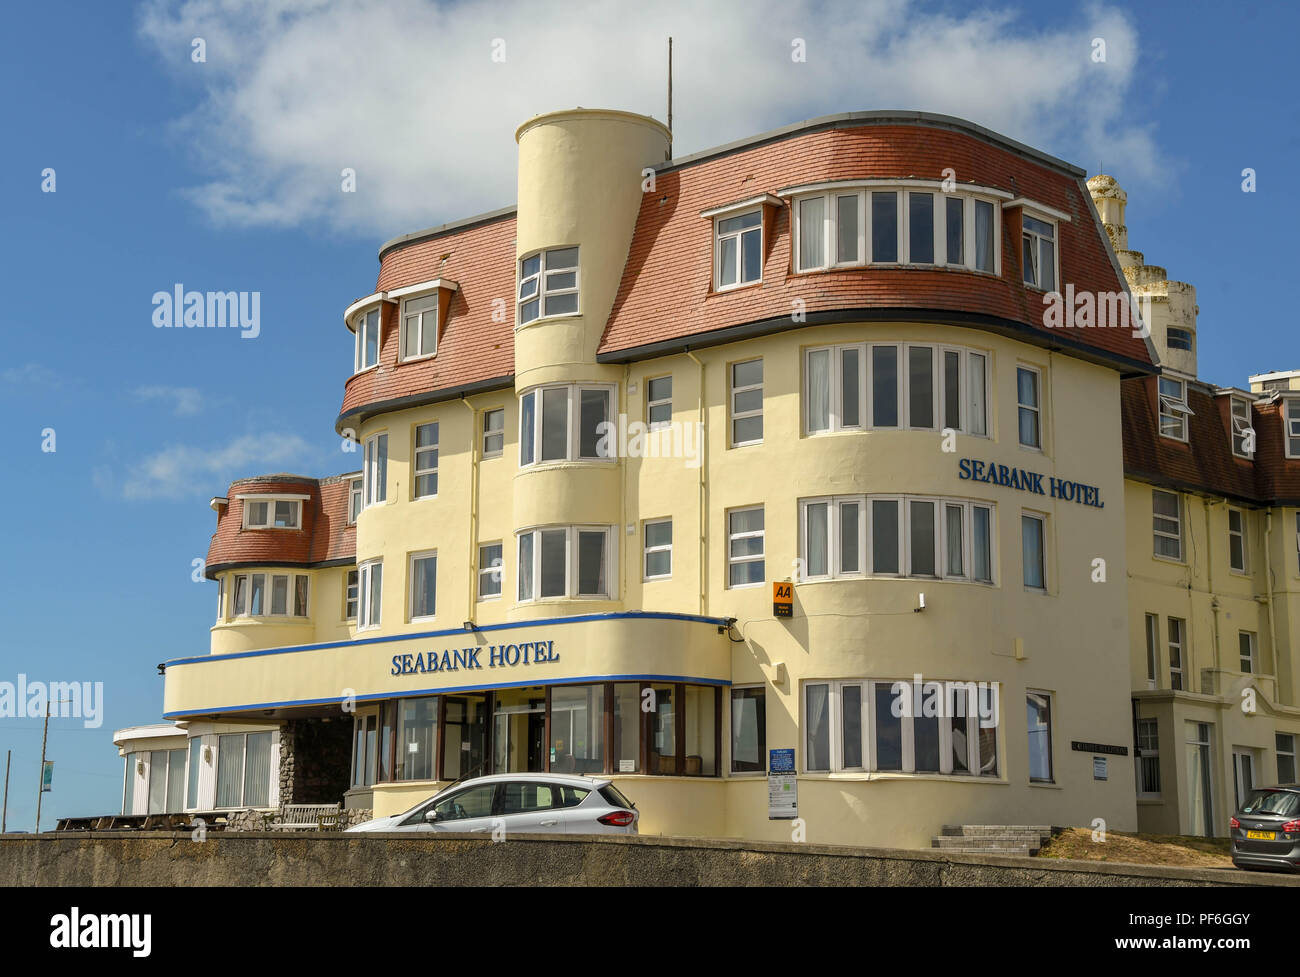 The Seabank Hotel on the esplanade in Porthcawl, Wales Stock Photo